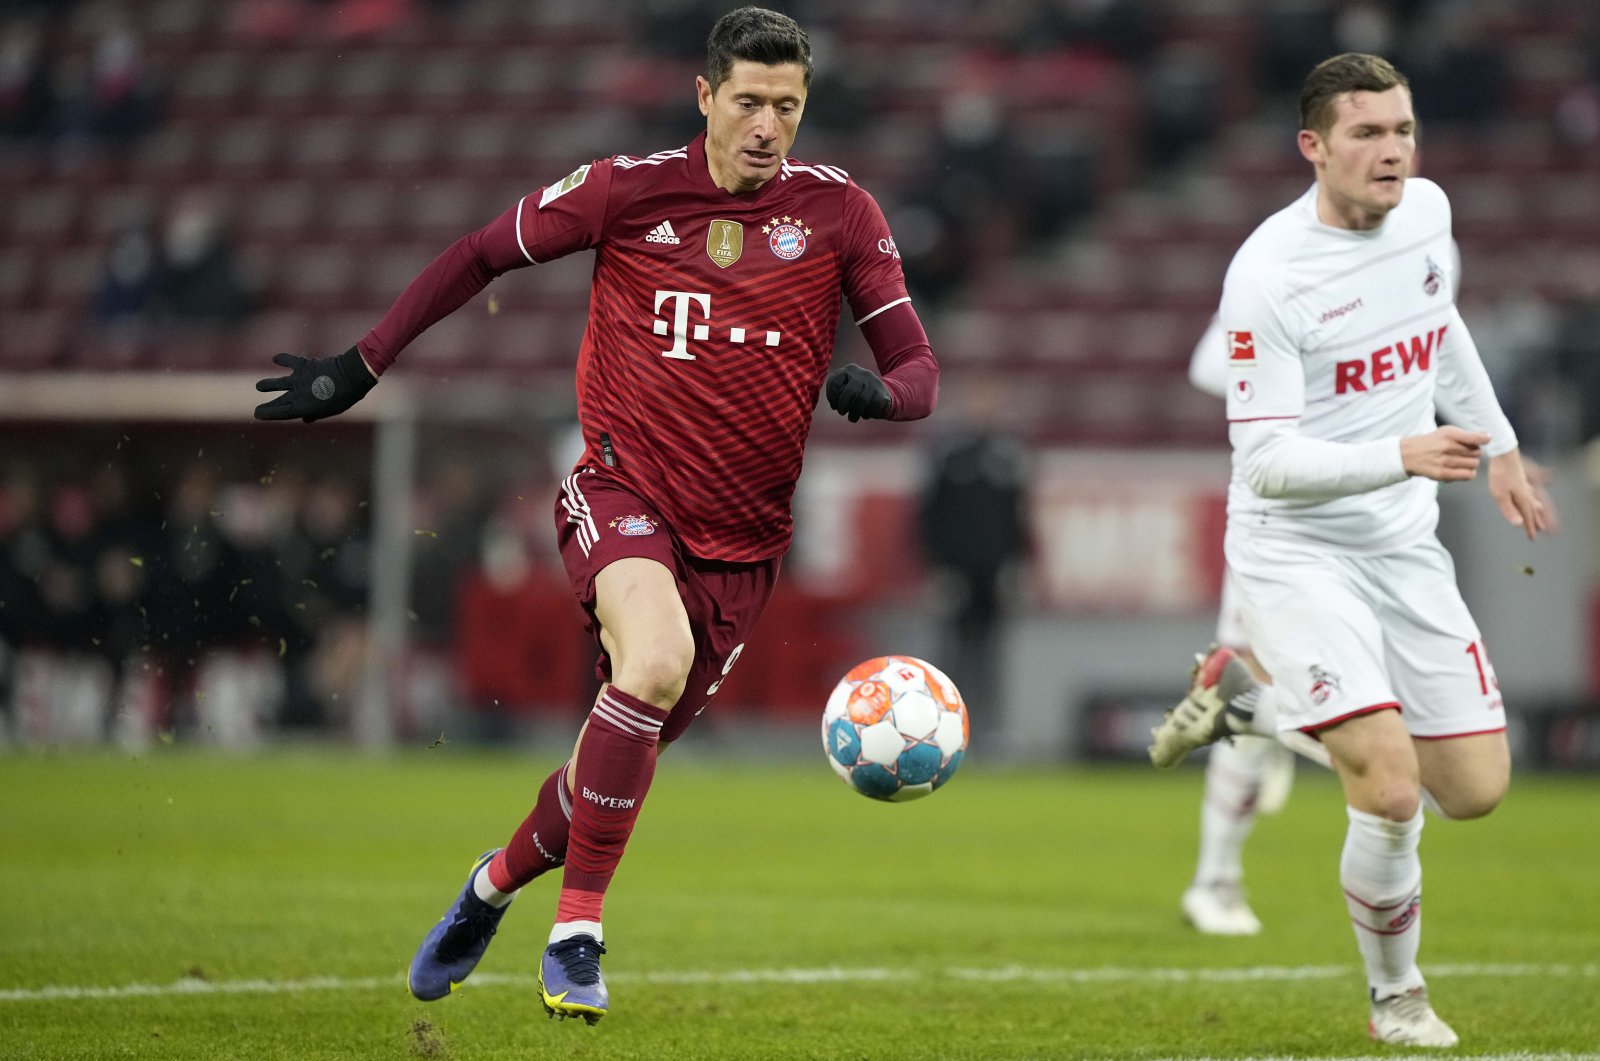 Bayern&#039;s Robert Lewandowski attacks with the ball in a Bundesliga match against FC Cologne, Cologne, Germany, Jan. 15, 2022. (AP Photo)